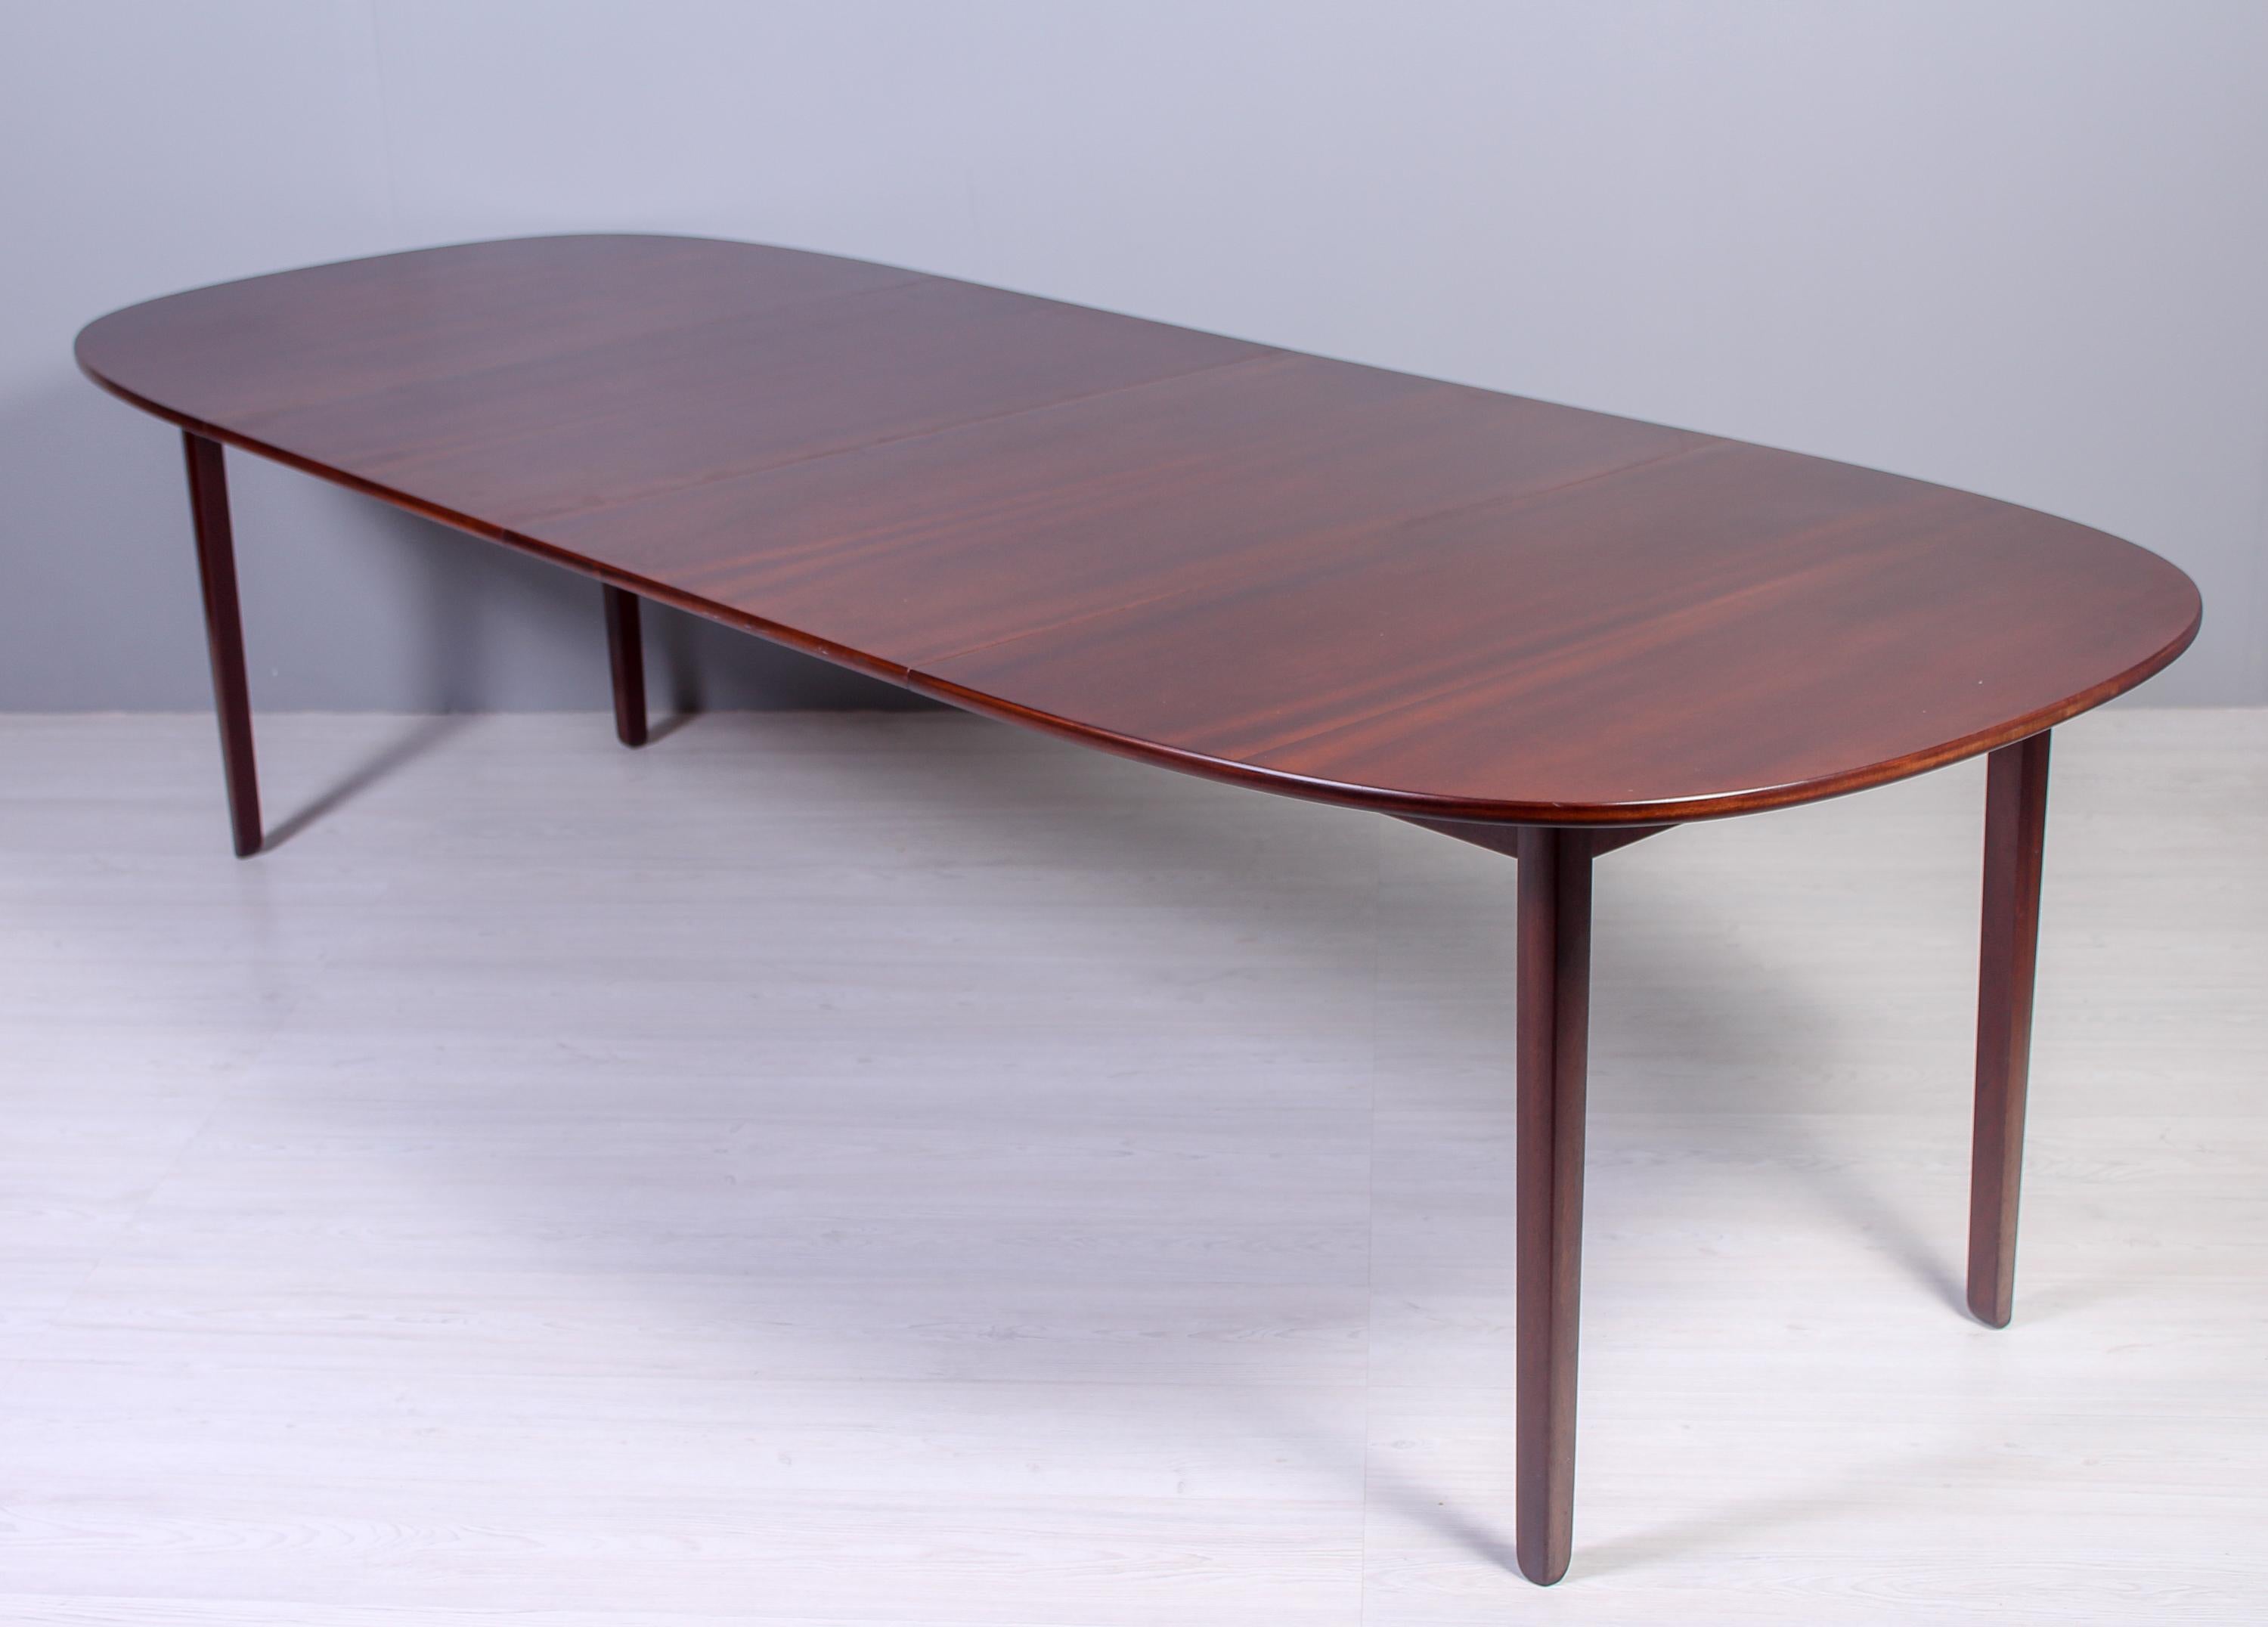 Ole Wanscher Mahogany Rungstedlund Dining Table, 1960s For Sale 1